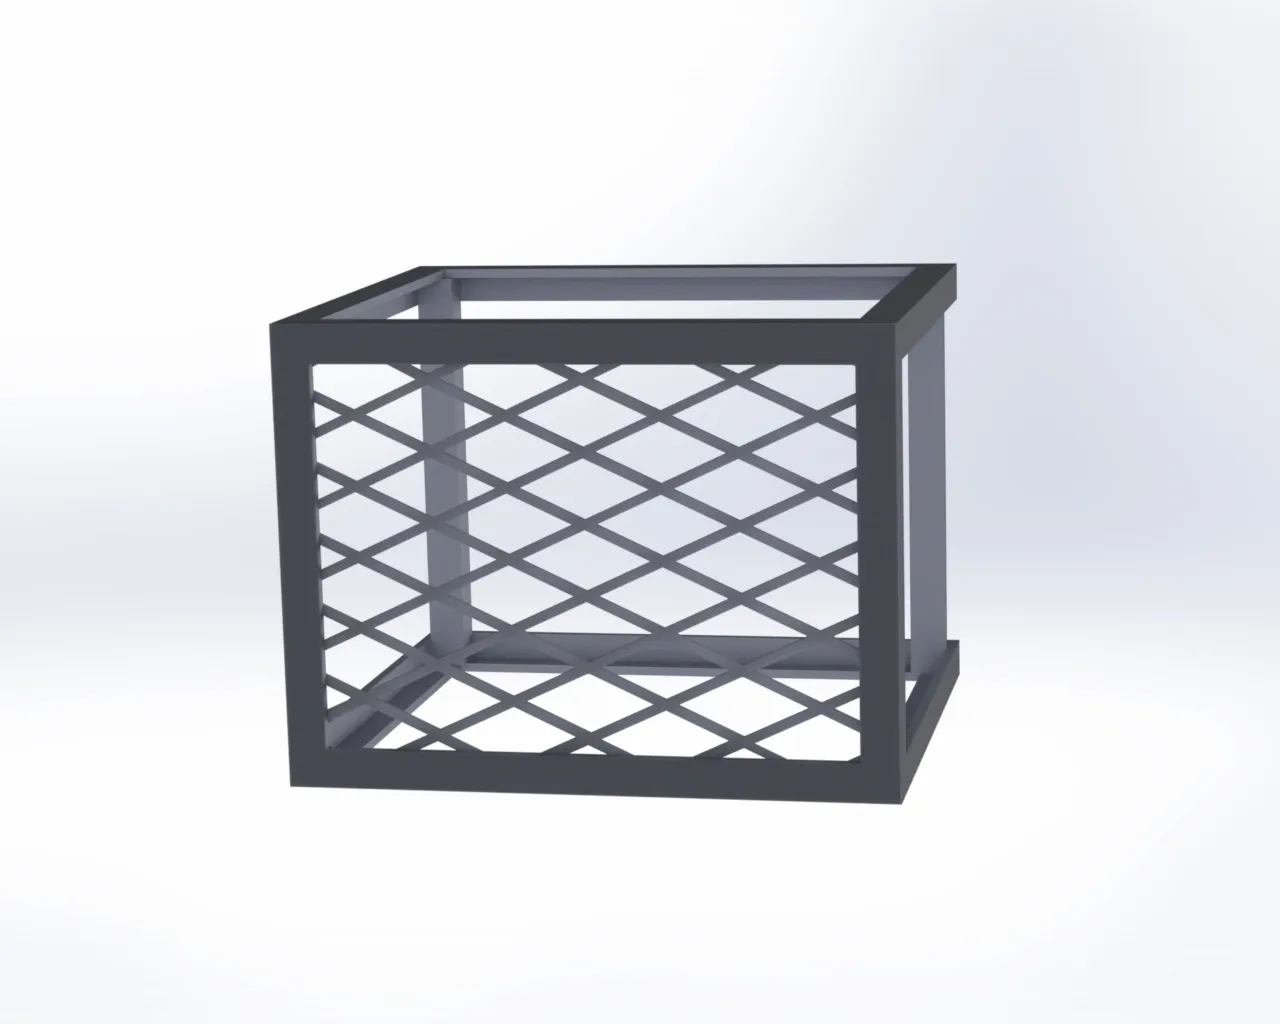 A black metal cage with an open top.